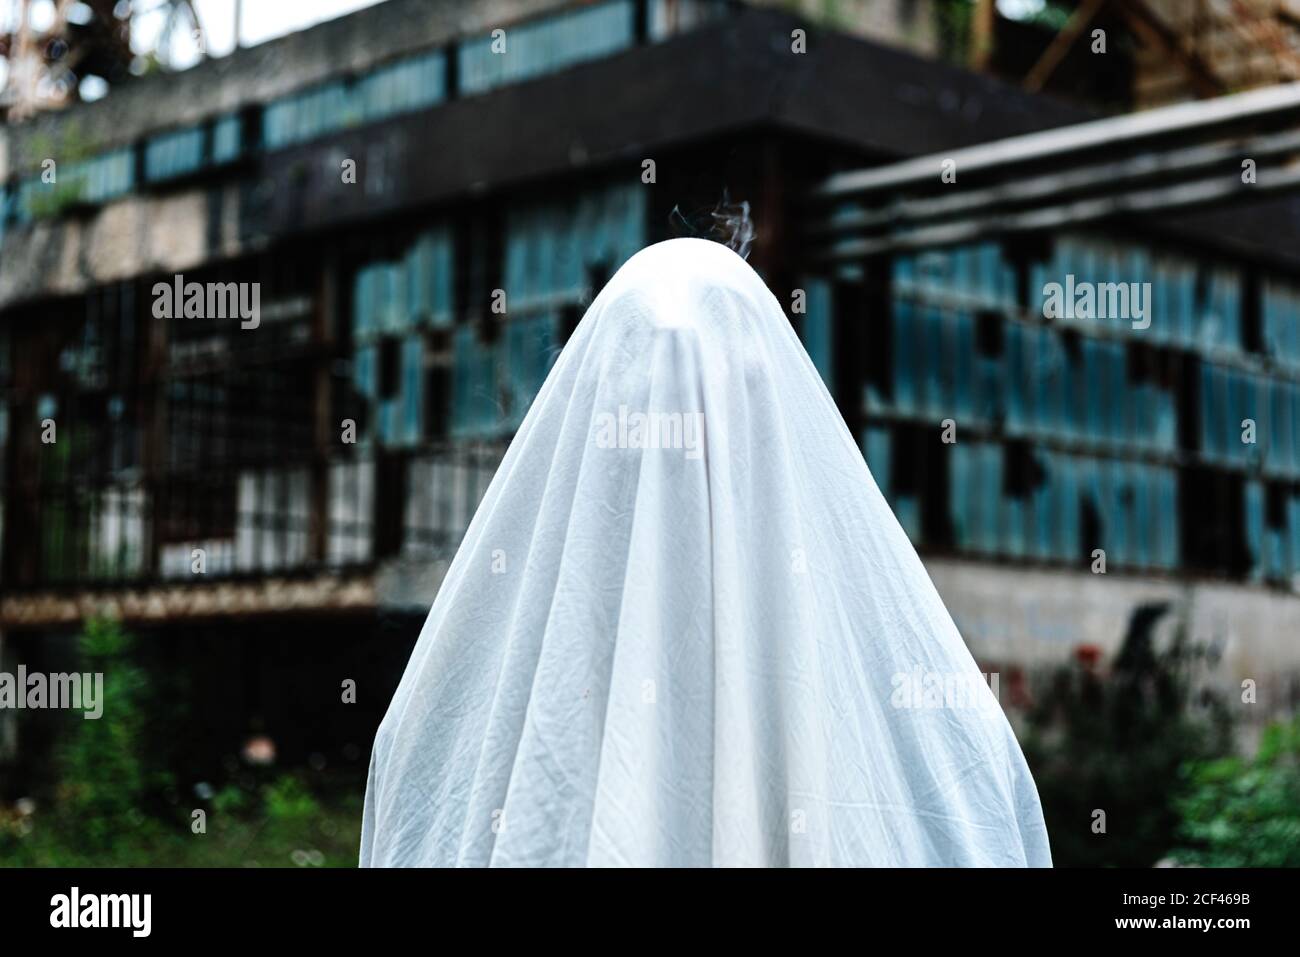 unrecognizable person covered in white bed sheet masked as a ghost near old abandoned mine building with rusty metal construction and shabby walls Stock Photo